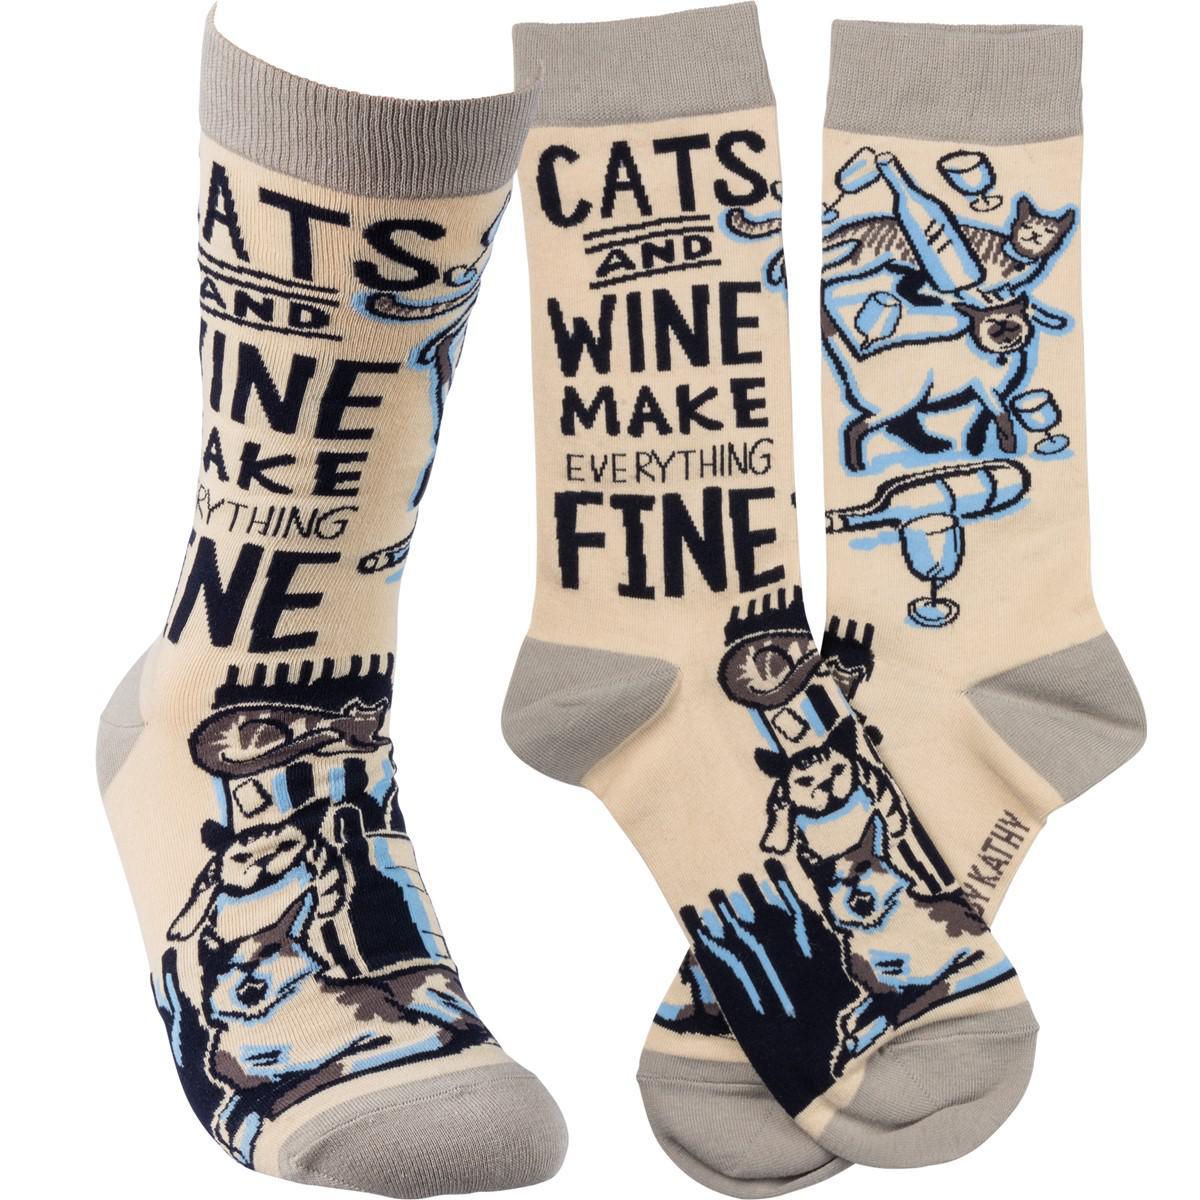 Cats And Wine Make Everything Fine Socks